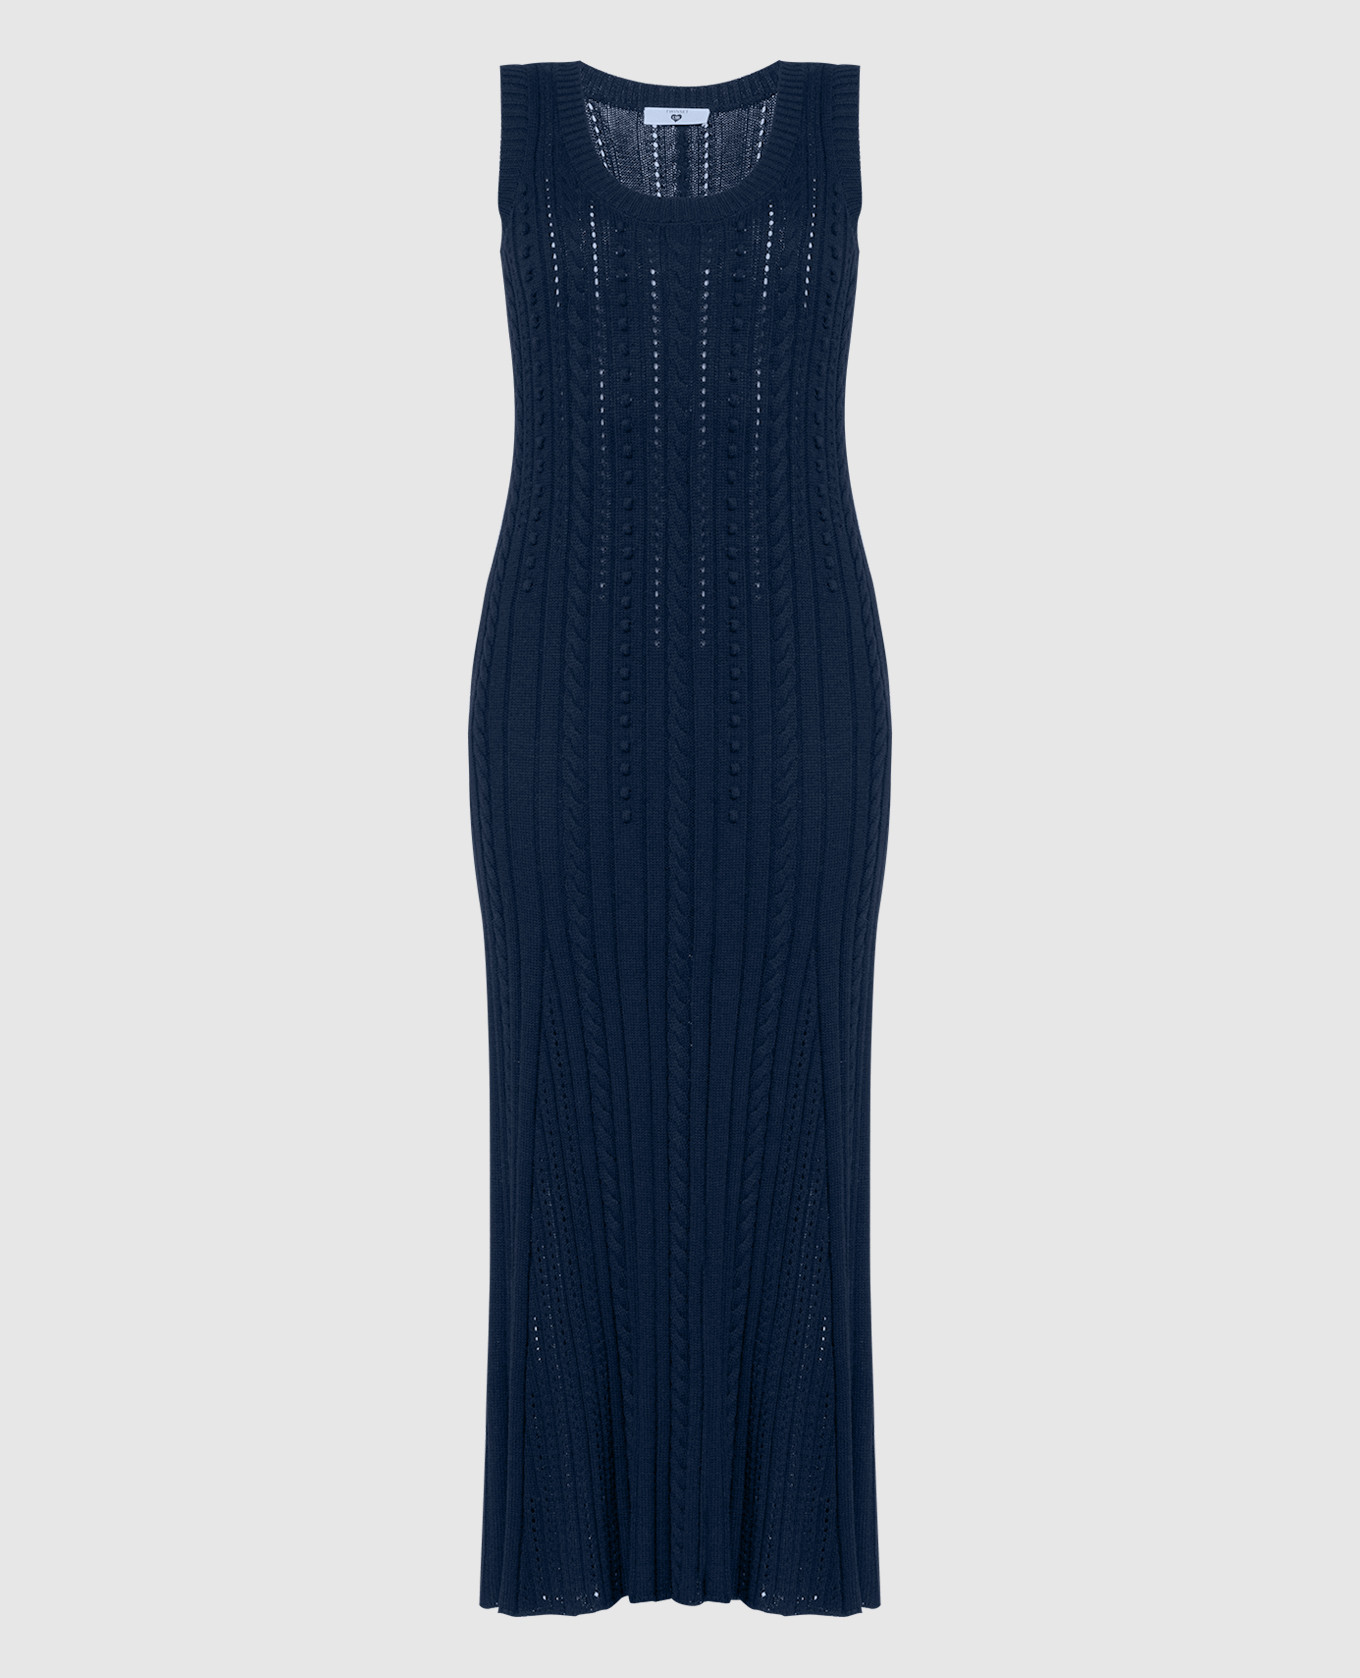 Blue dress with textured pattern with logo